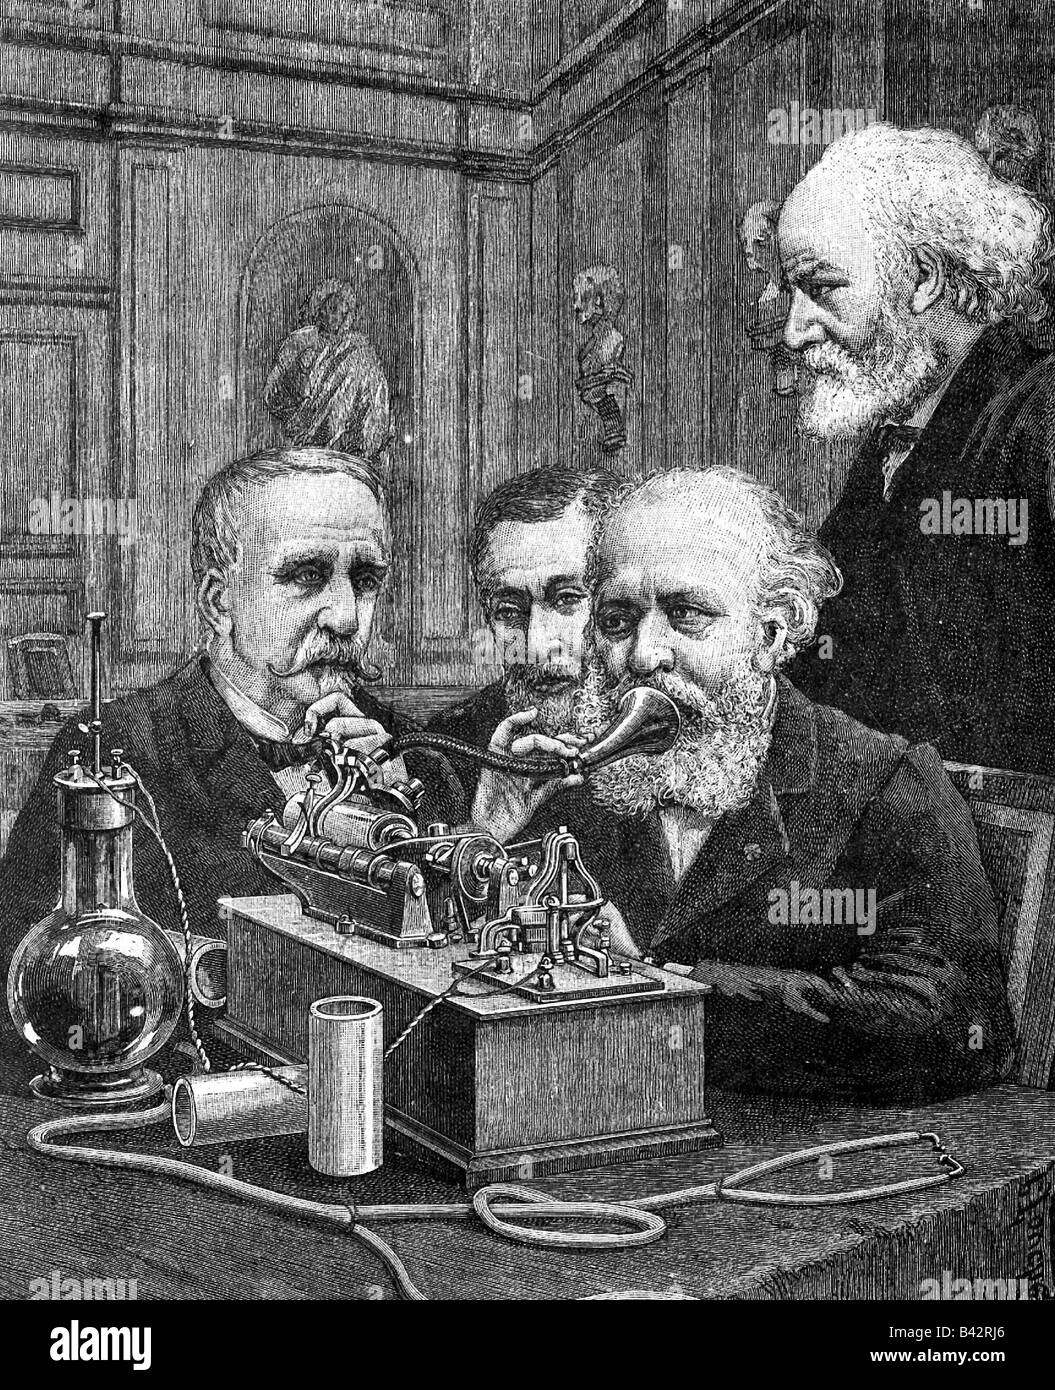 Gounod, Charles, 17.6.1818 - 147.10.1893, French composer, with Duke Henri of Aumale, Alfred Des Cloizeaux and Pierre Jules Janssen in front of a phonograph, Paris, 27.4.1889, wood engraving, Stock Photo